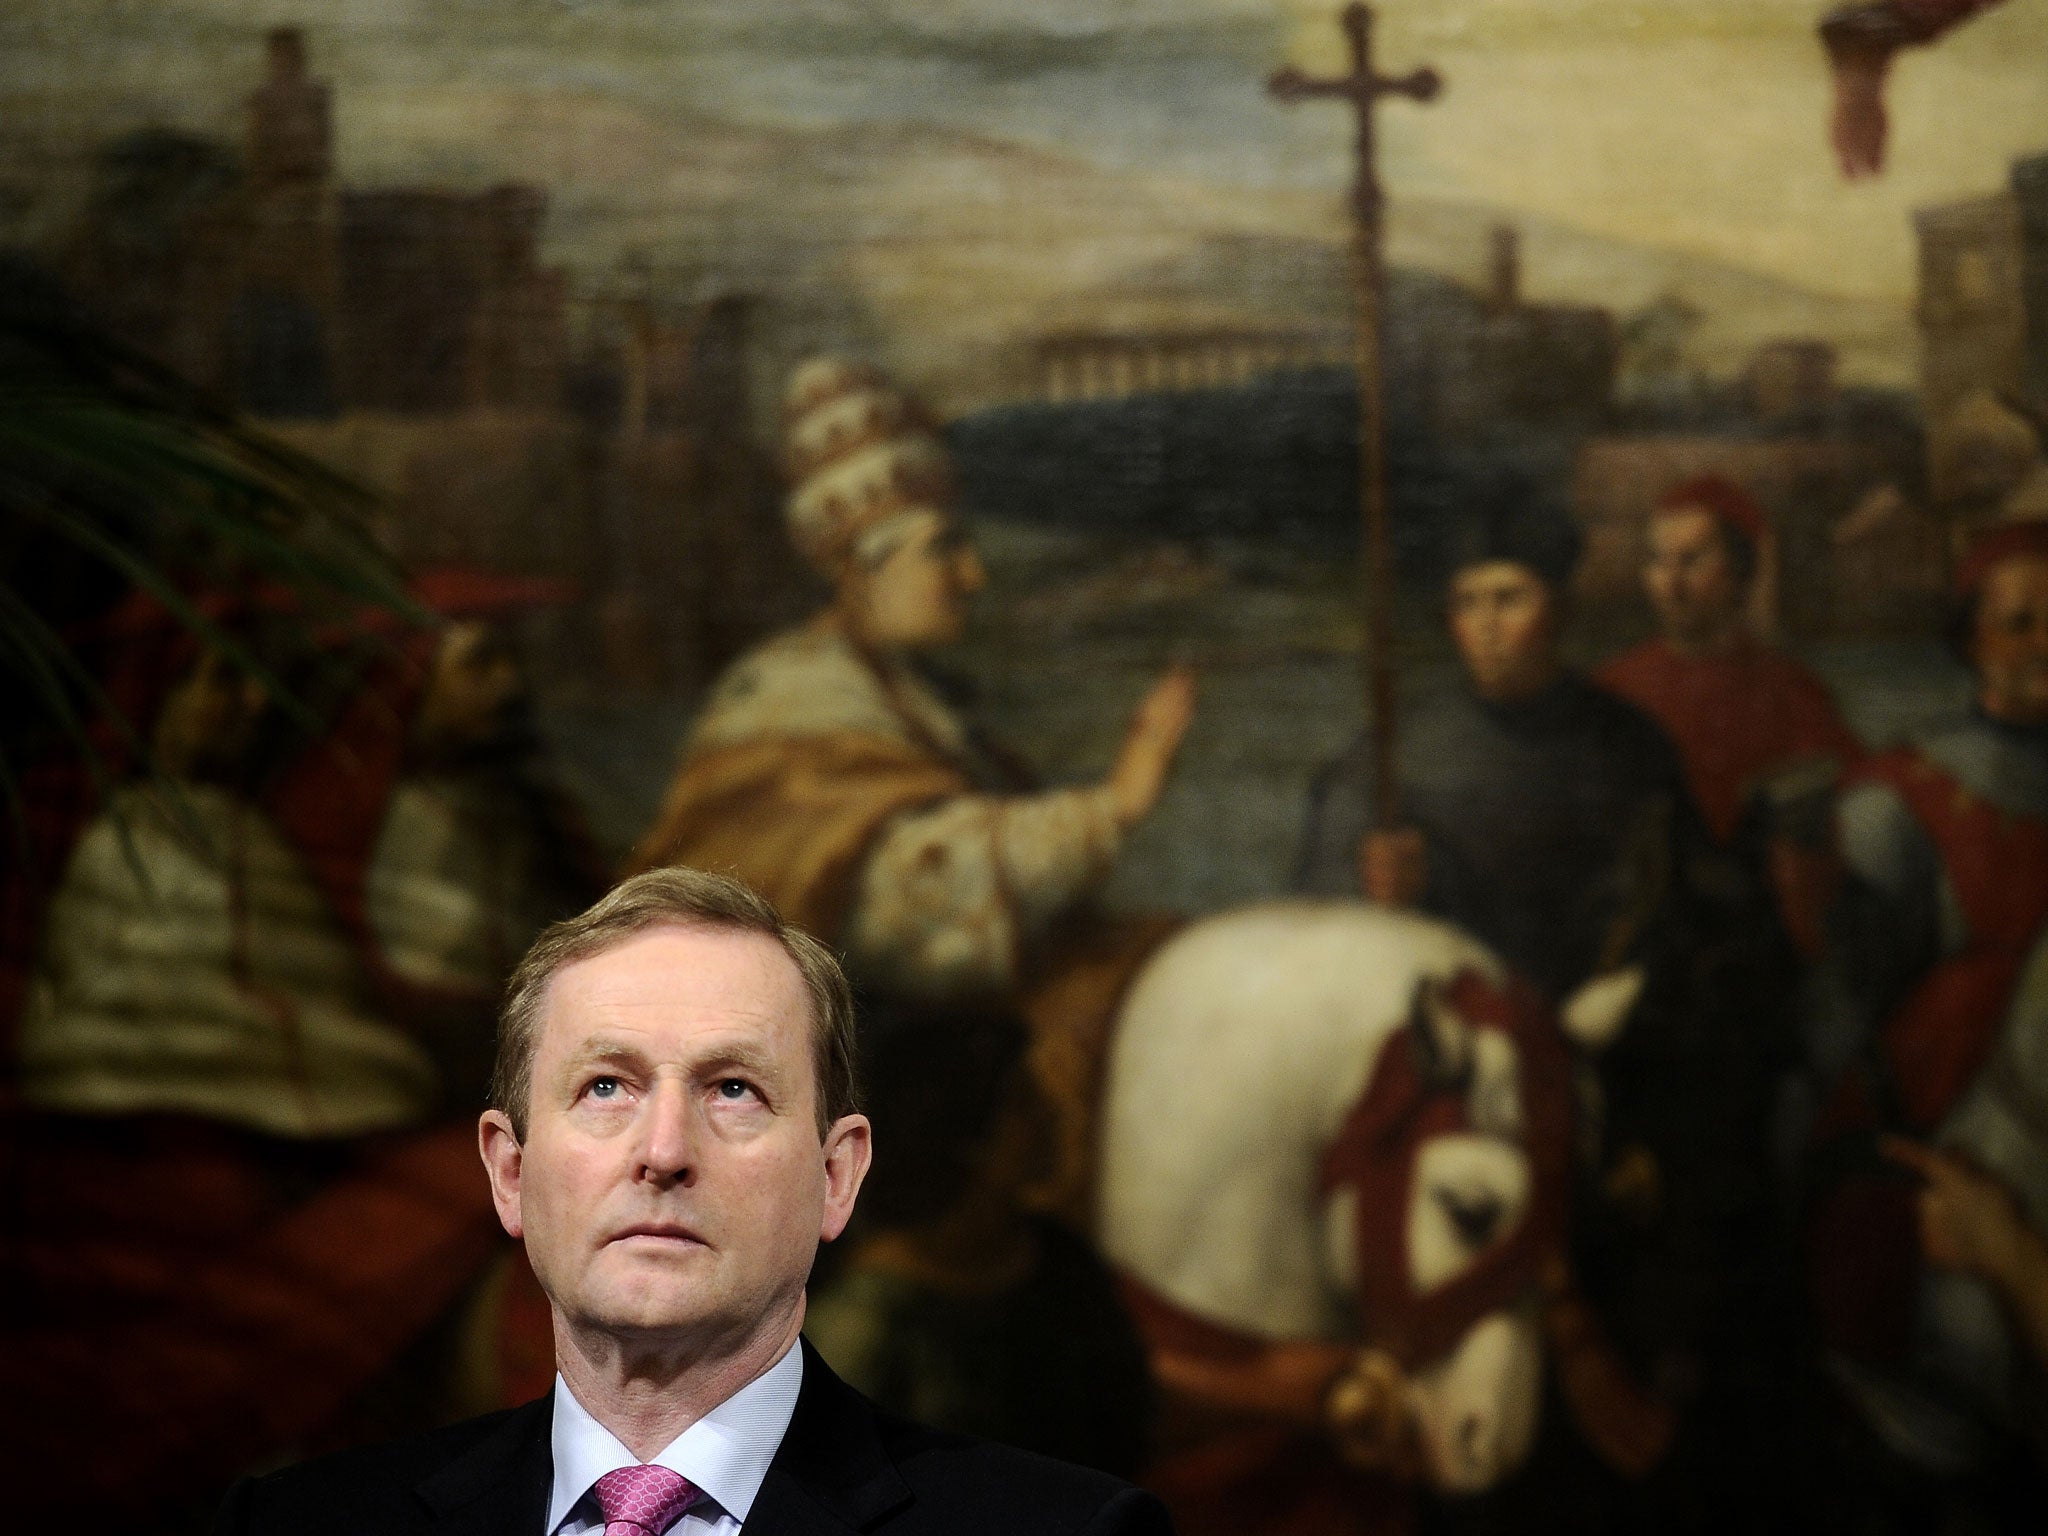 Ireland's Prime Minister Enda Kenny looks on during a joint press conference with his Italian counterpart after their meeting at Palazzo Chigi in Rome on February 23, 2012.